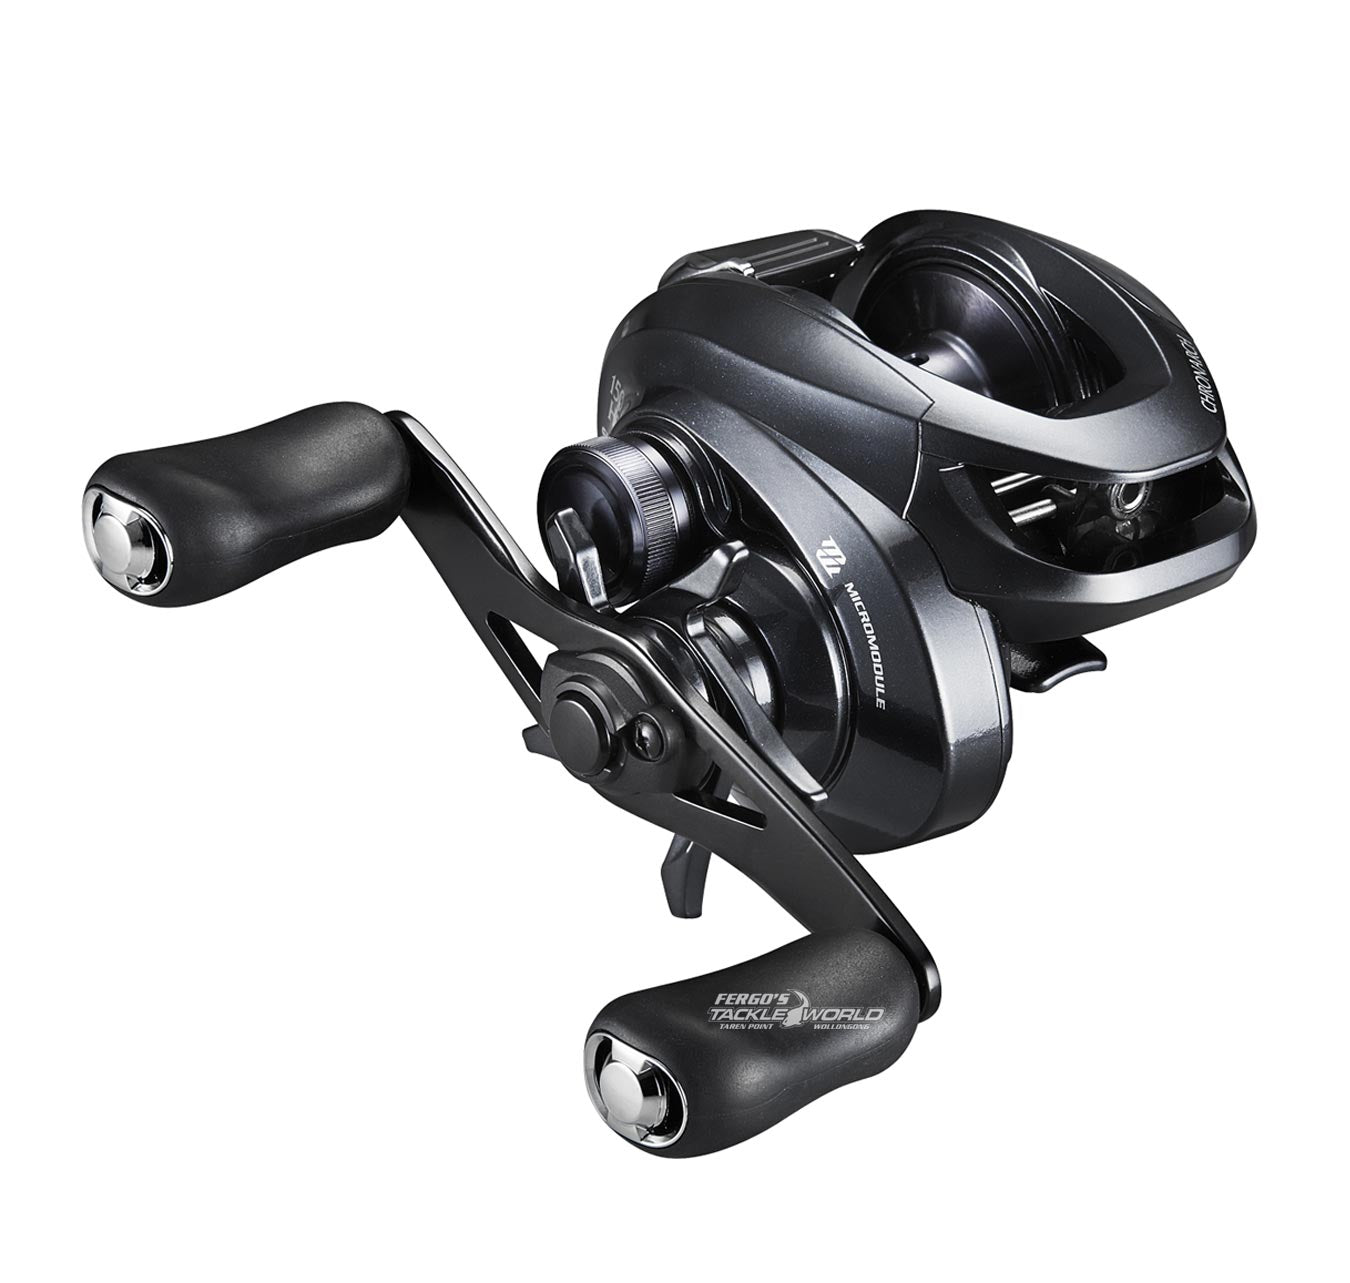 Shimano Fishing Reels Page 3 - Fergo's Tackle World